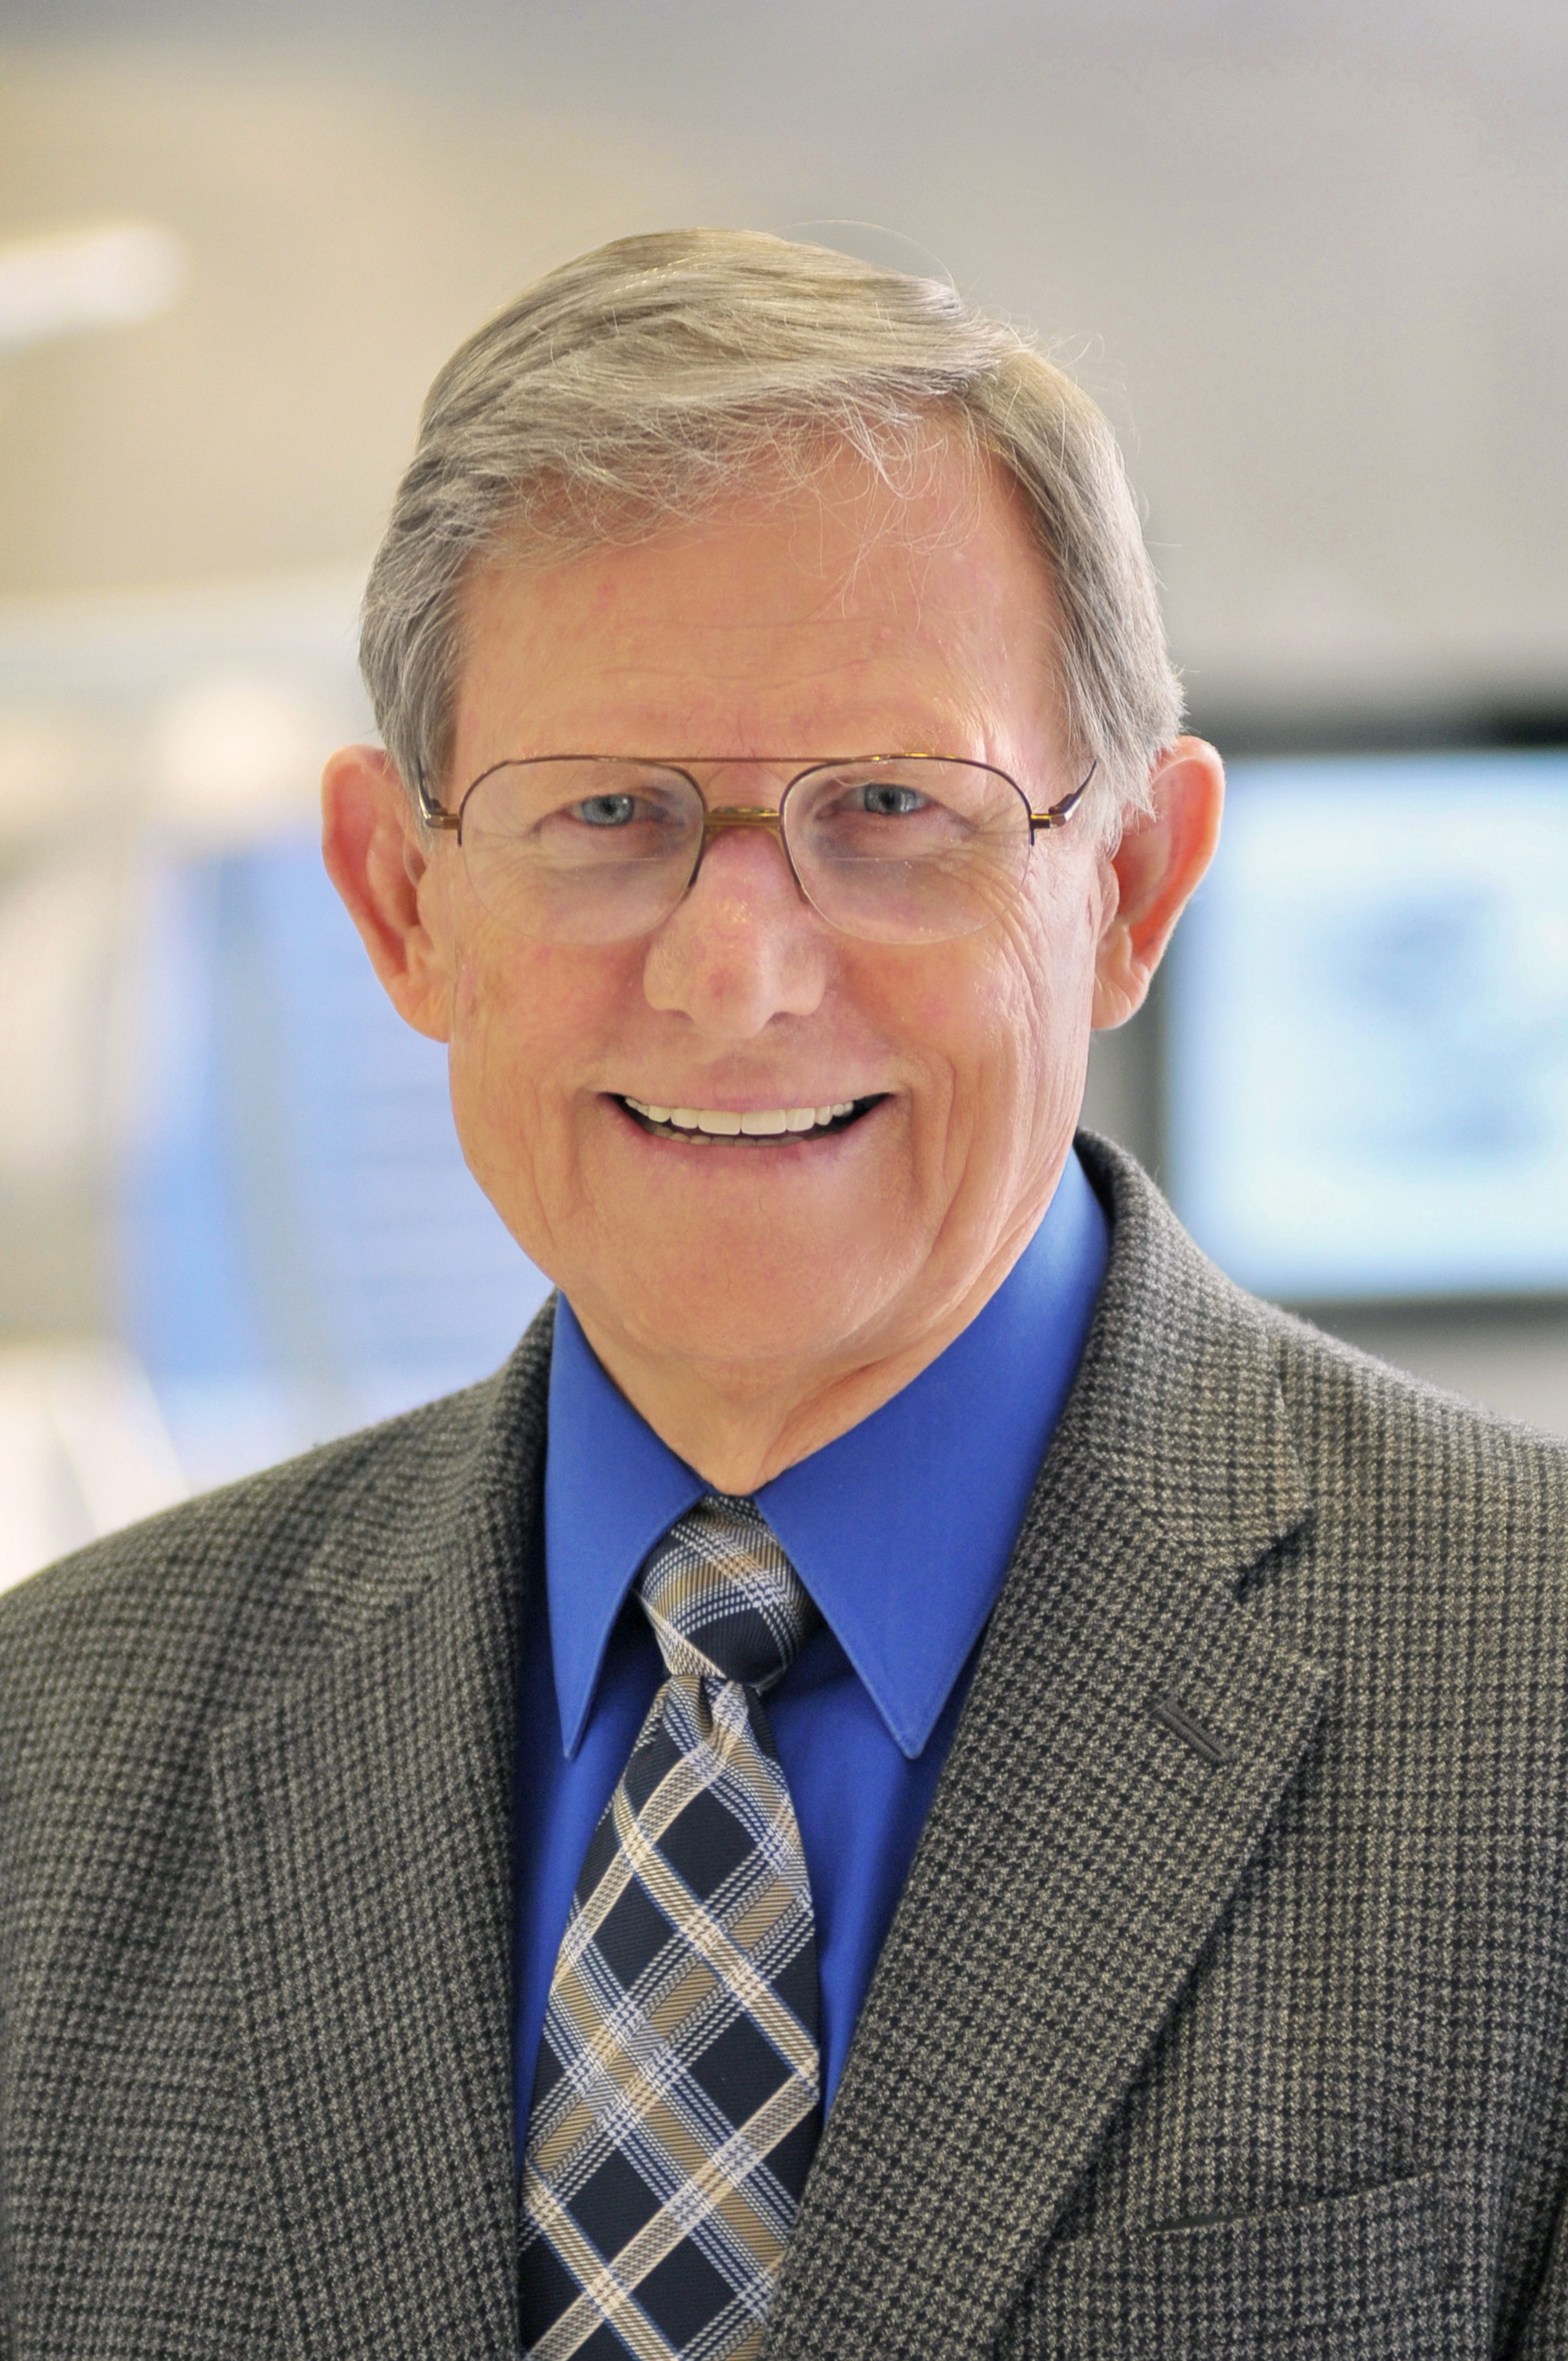 Dr. William R. Brinkley, dean emeritus of the Graduate School of Biomedical Sciences and distinguished service professor in the department of molecular and cellular biology.